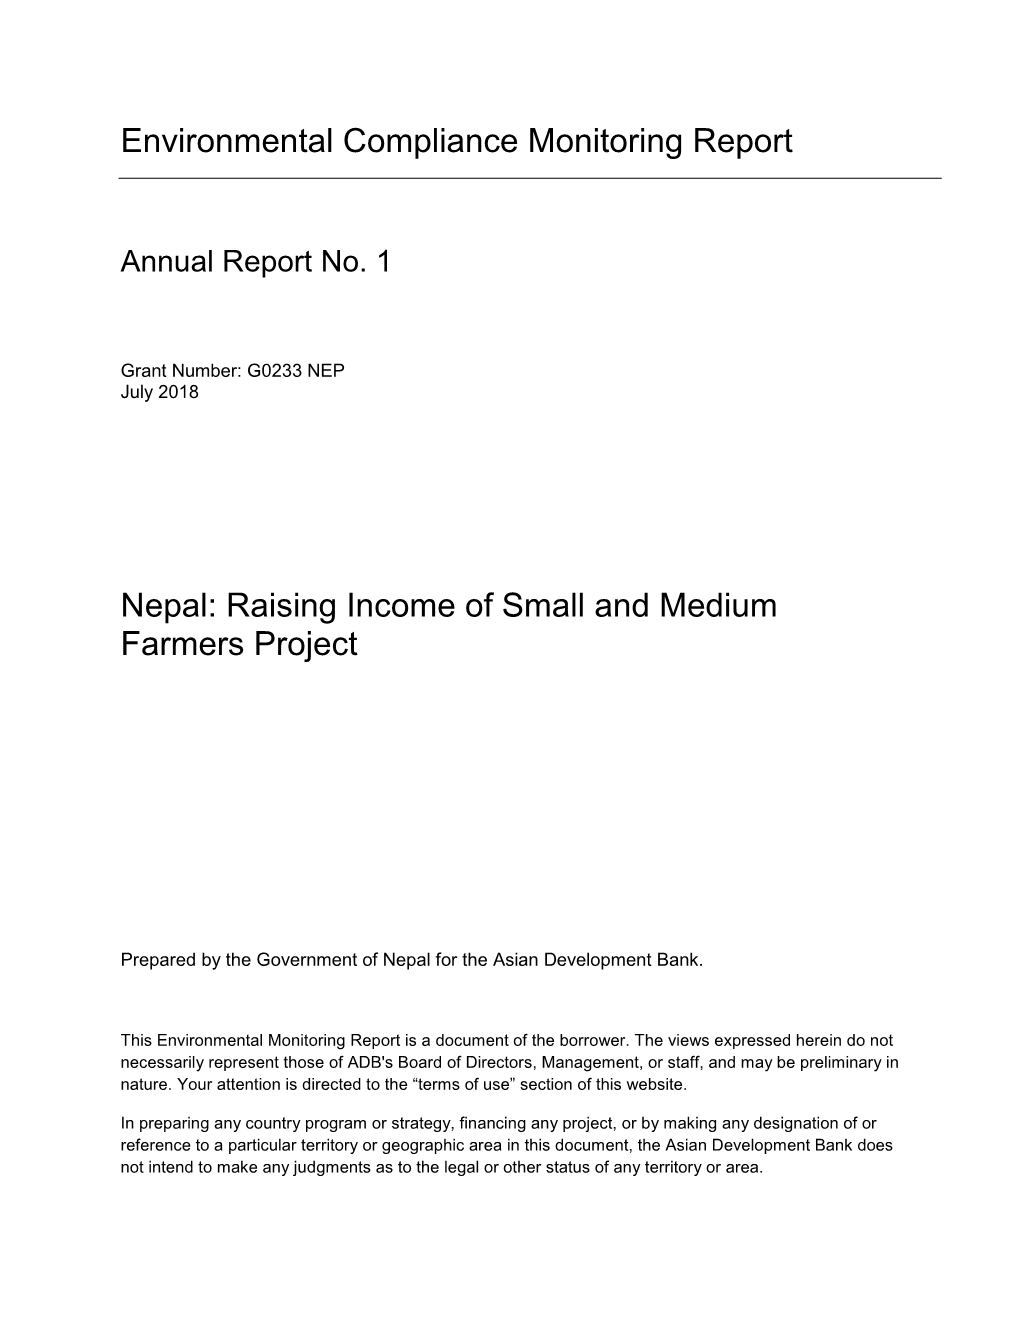 38423-022: Raising Incomes of Small and Medium Farmers Project